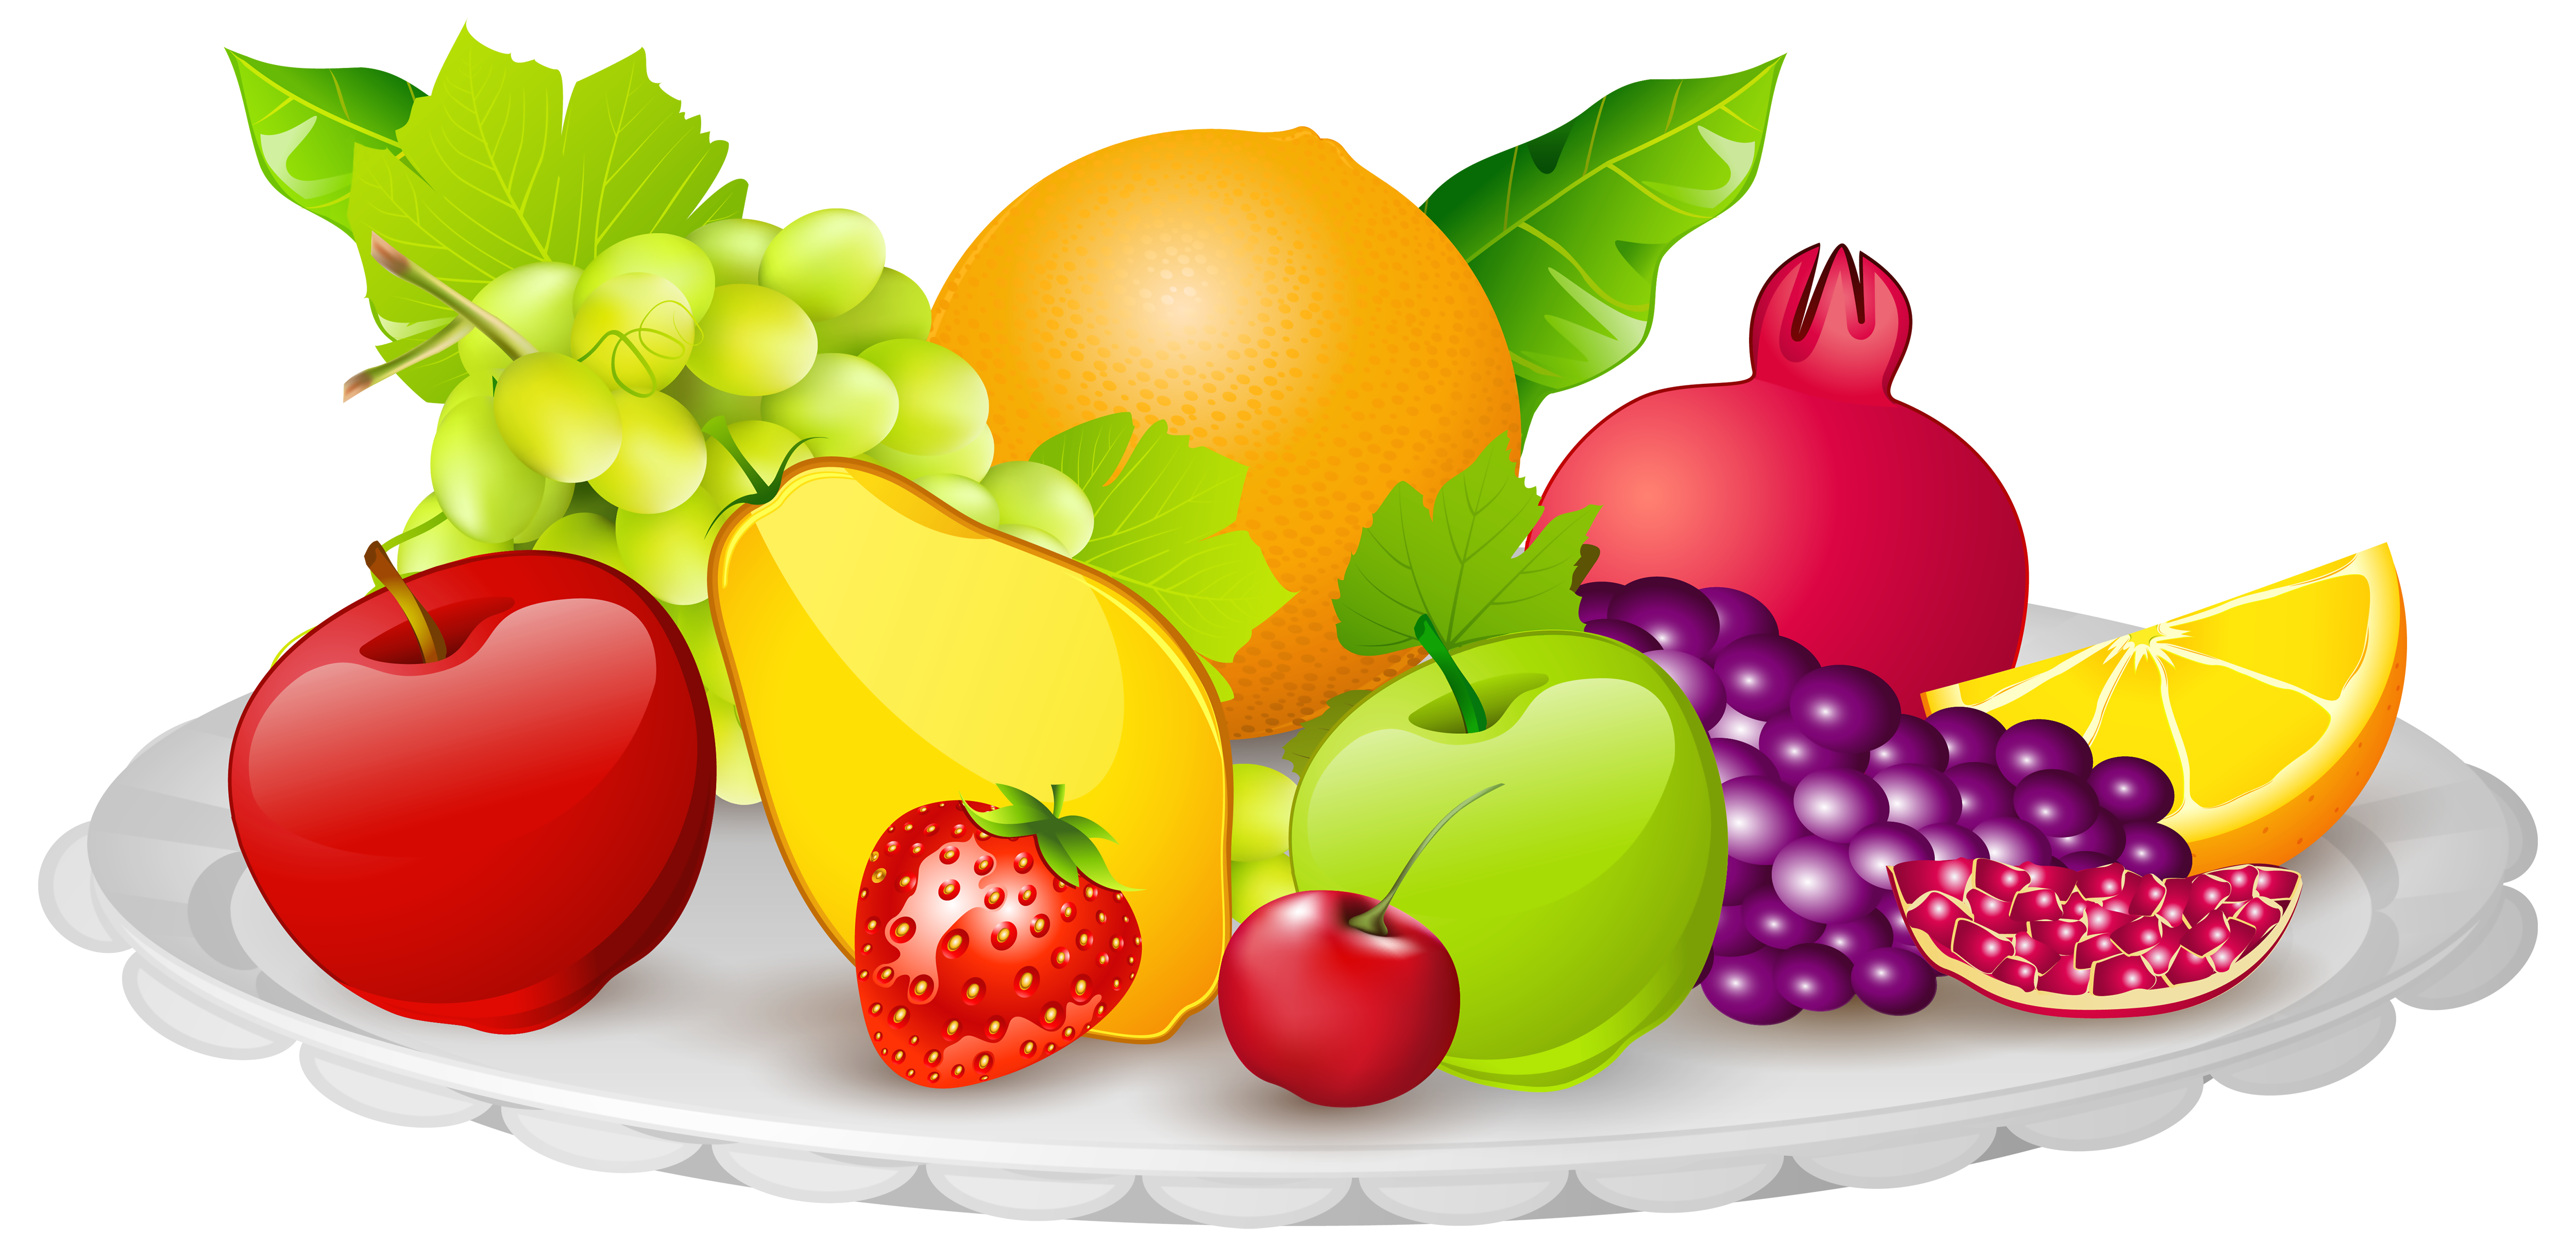 free clipart of fruits - photo #44